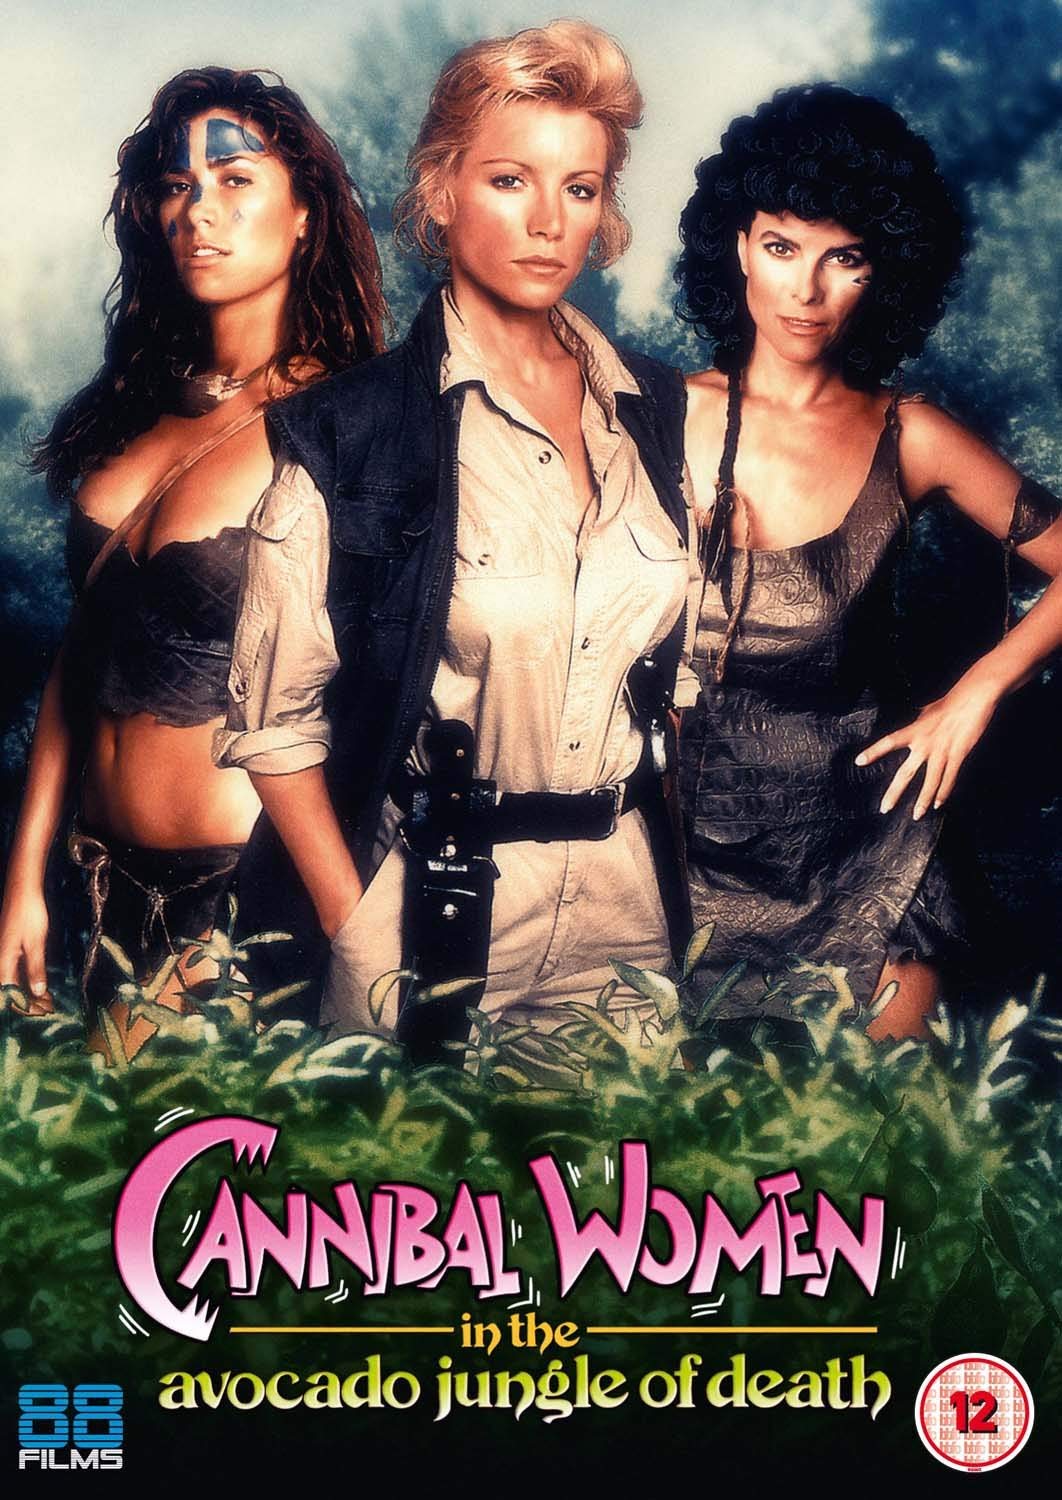 Cannibal Women In The Avocado Jungle Of Death (DVD)